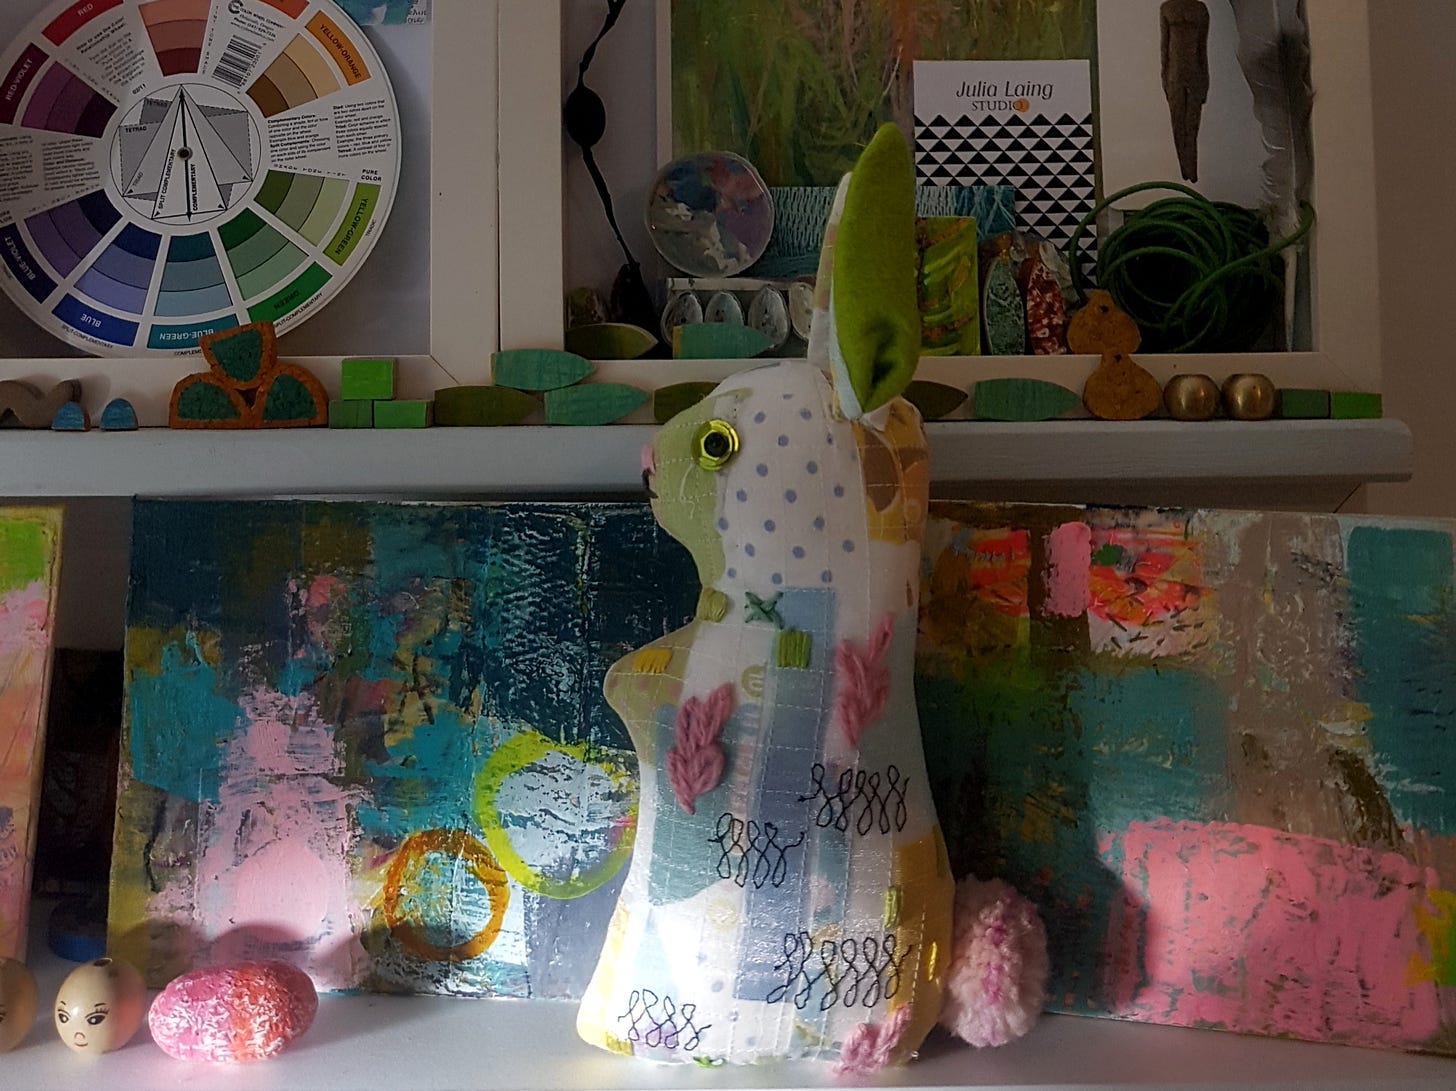 Studio shelves with handmade textile rabbit doll and paintings in progress by Julia Laing